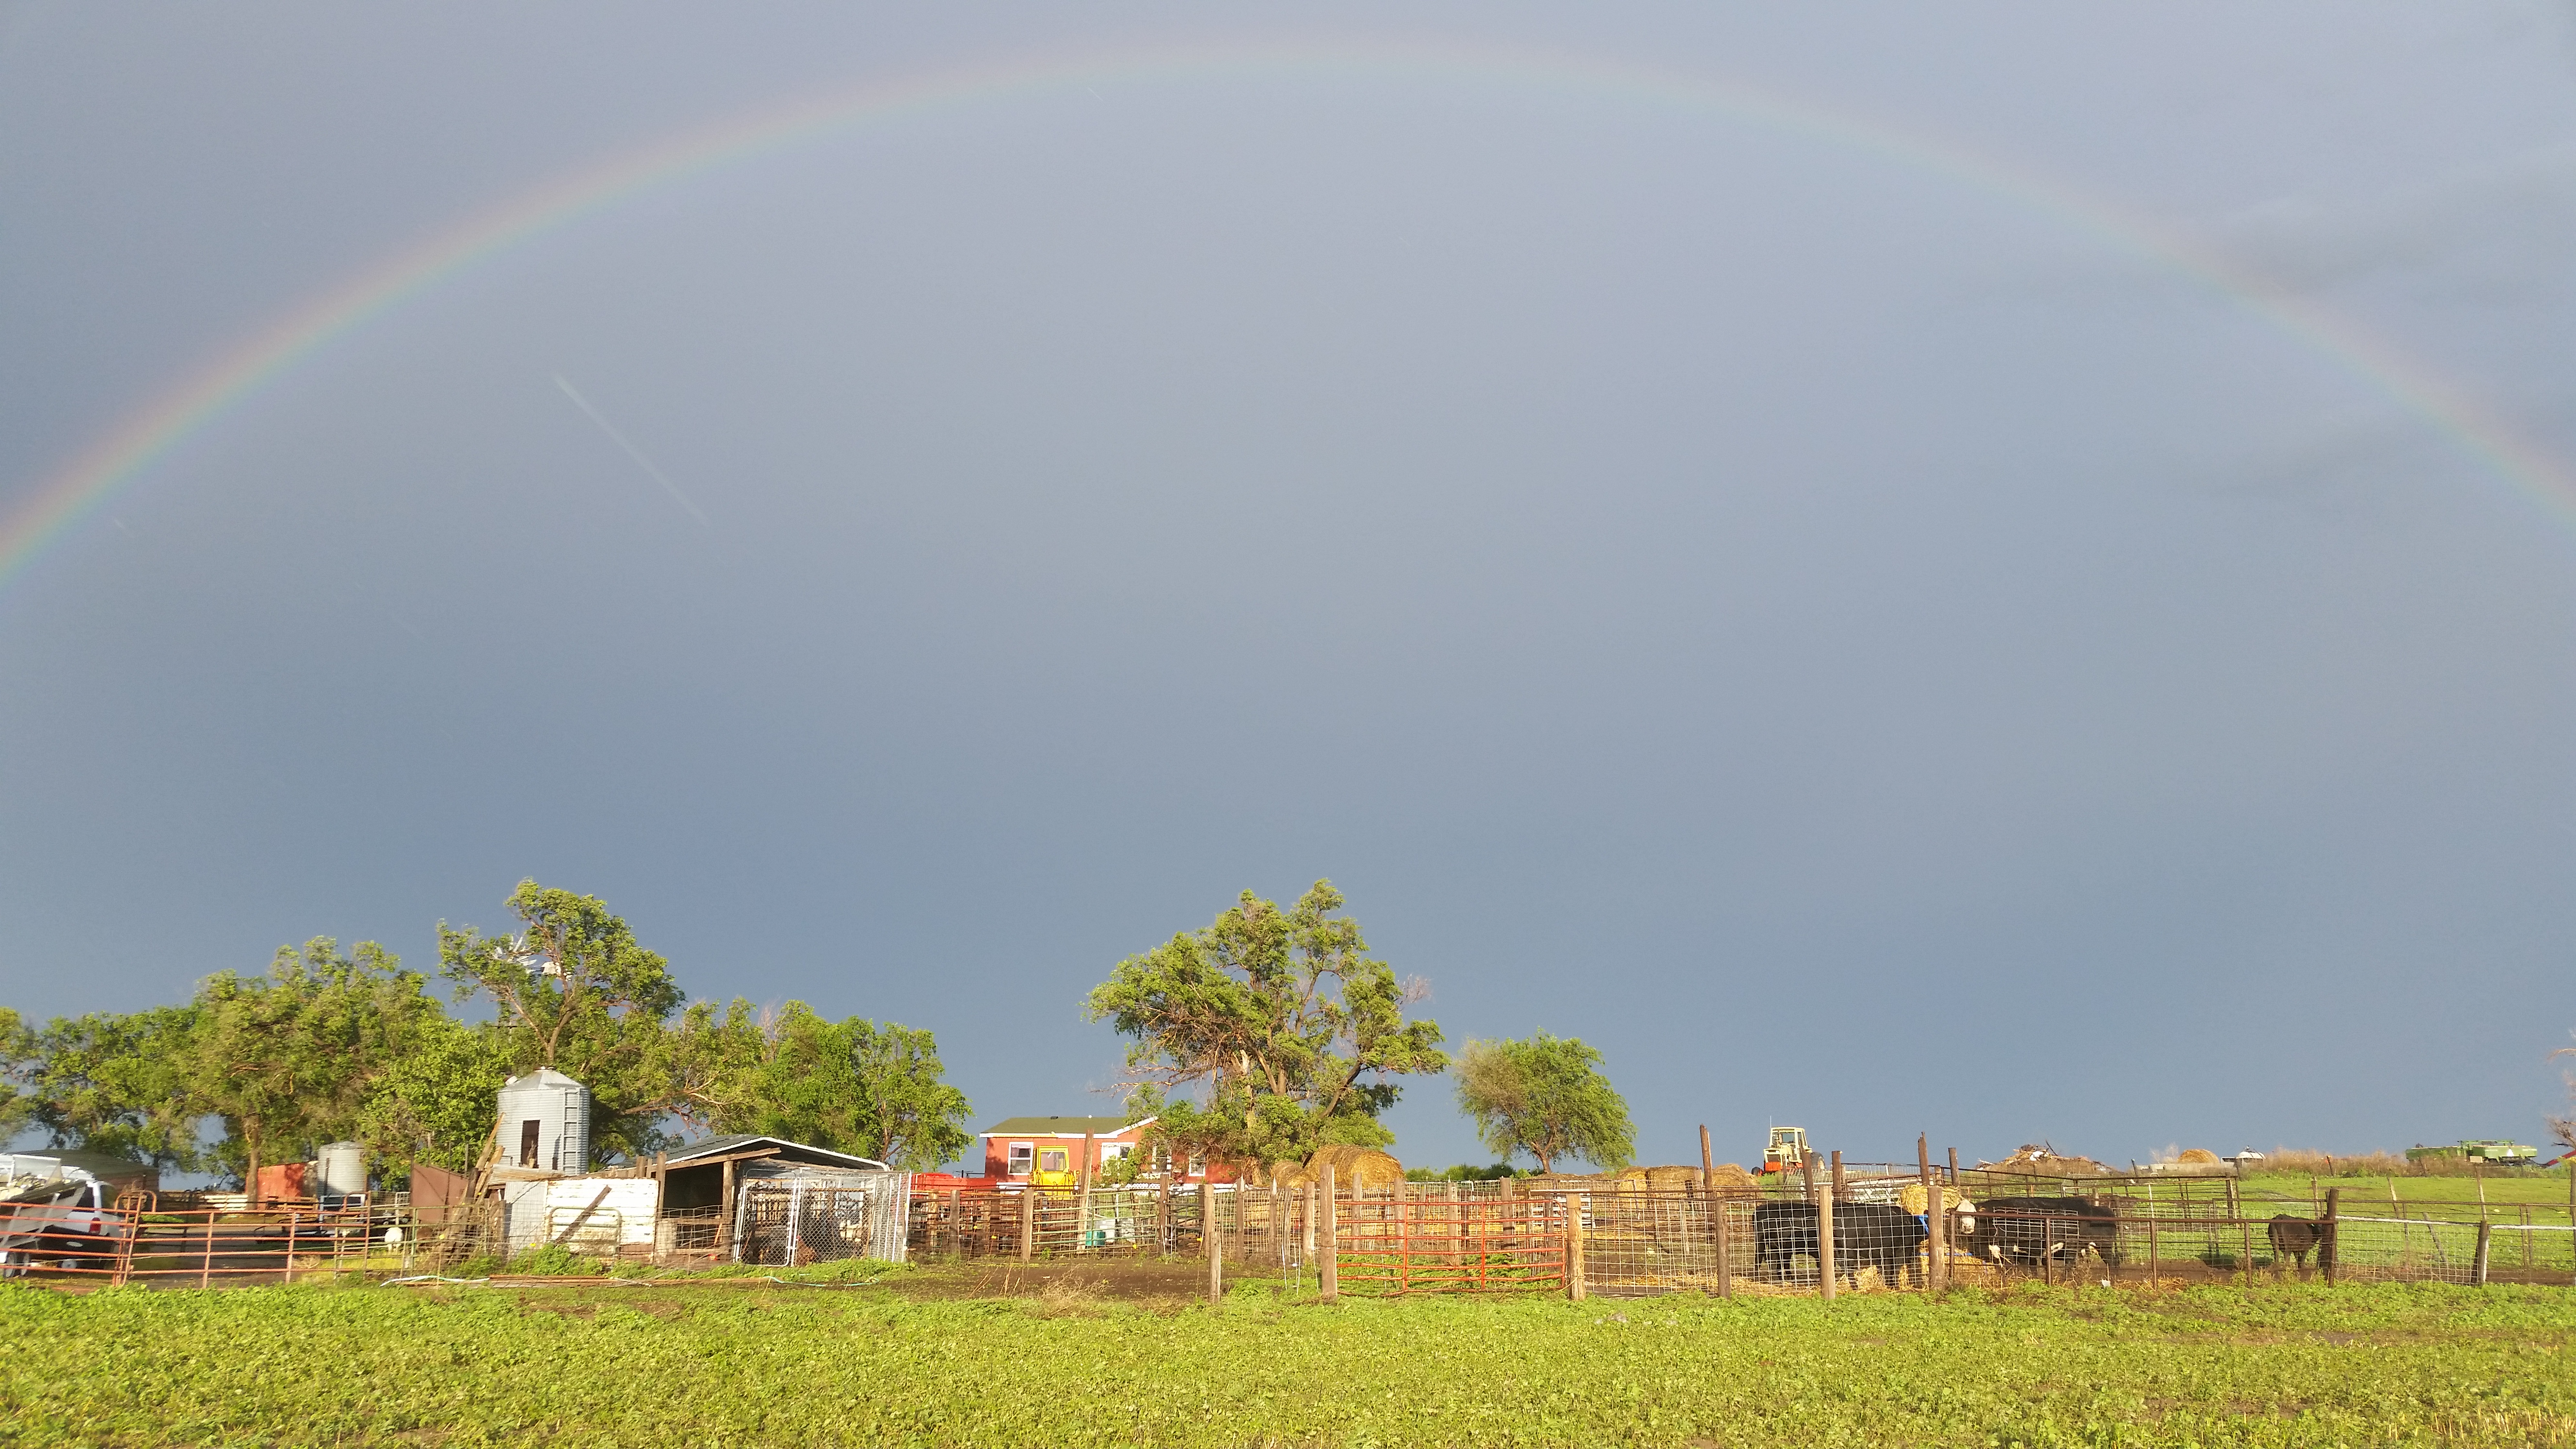 Picture of a rainbow over the farmstead after a late May storm.